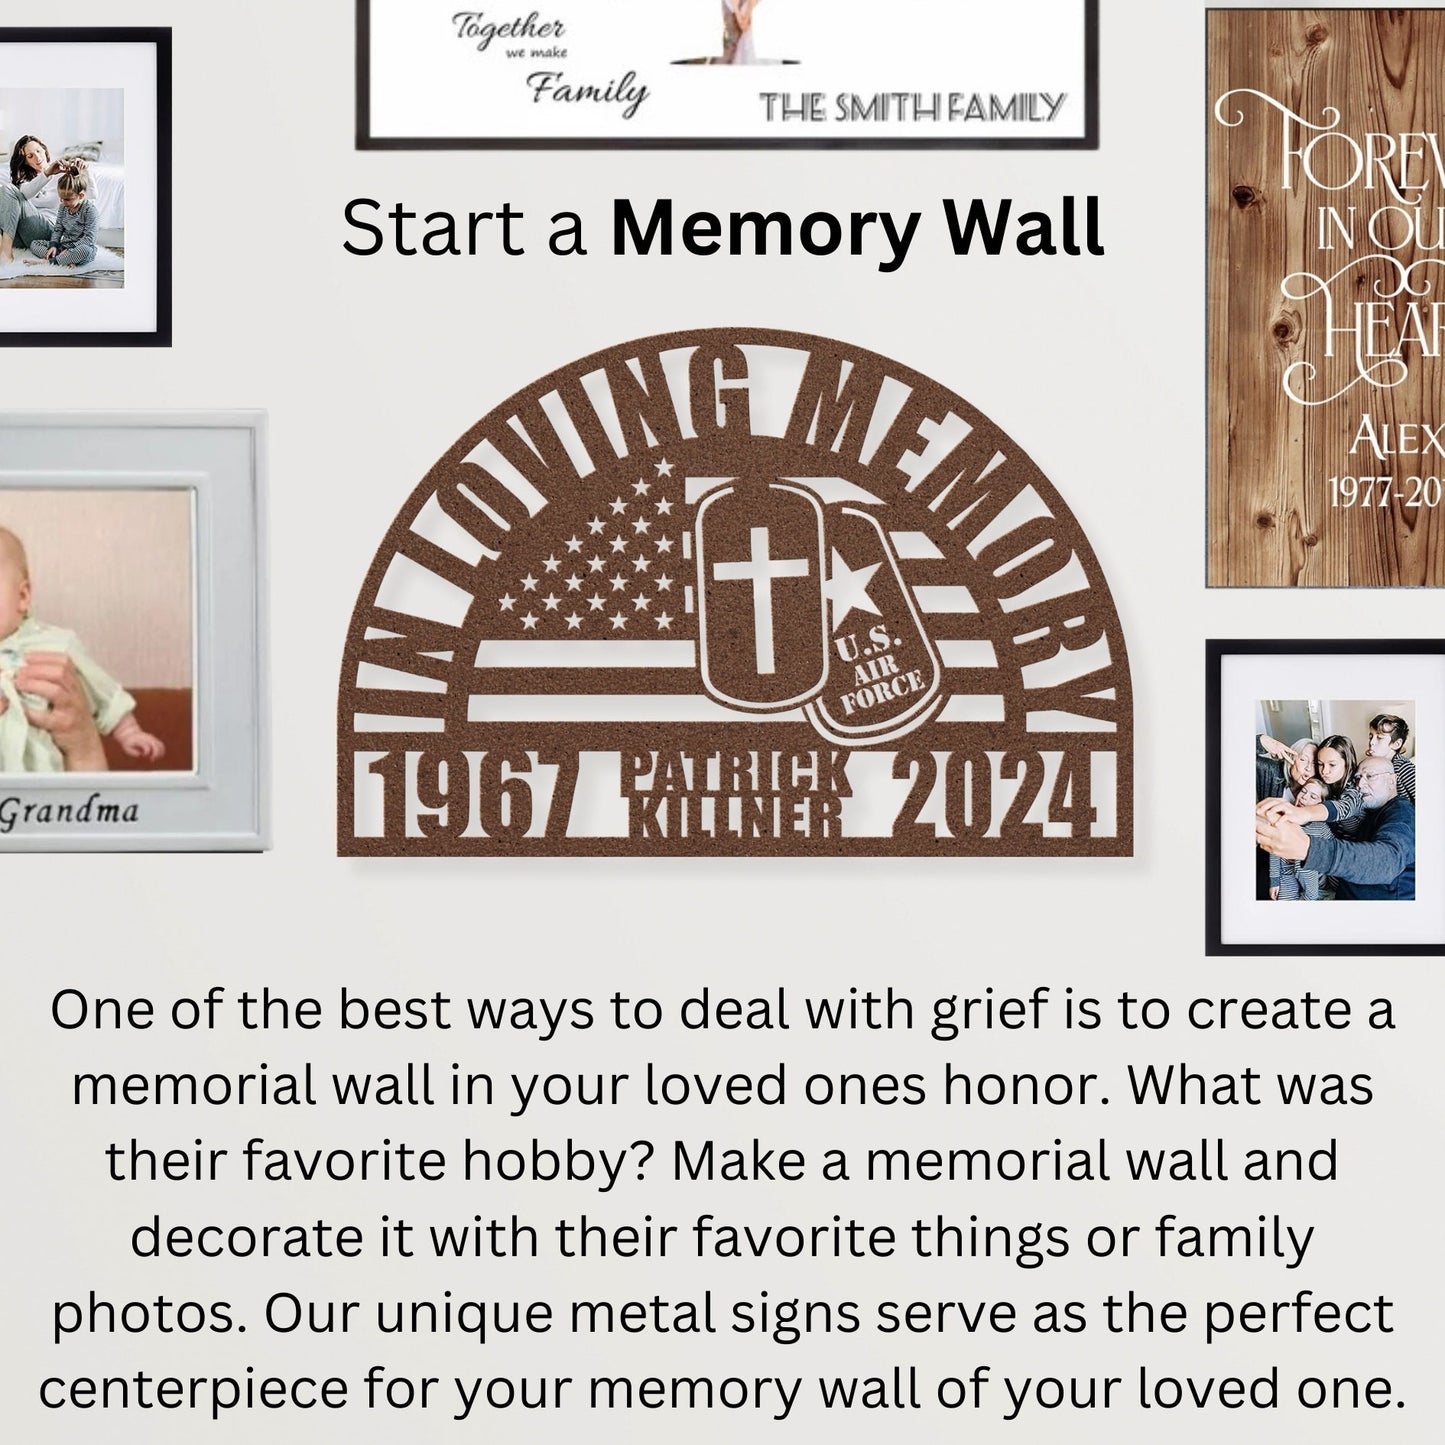 Personalized U.S. Air Force Veteran Memorial Gift: Perfect Sympathy Gift for The Loss of Your Fallen Soldier